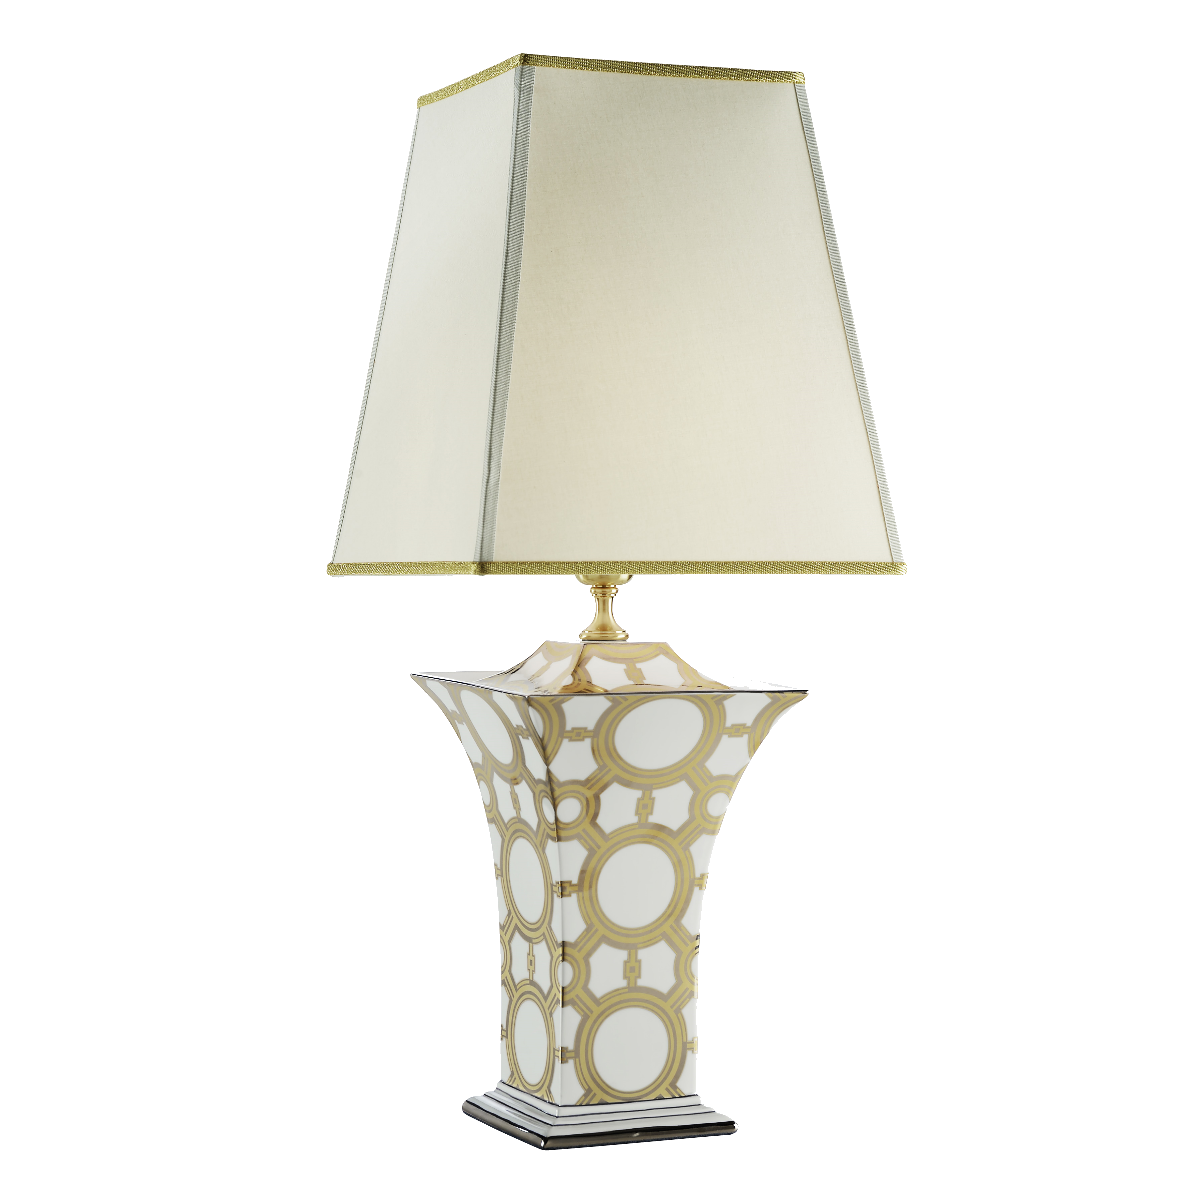 TABLE LAMP 5660